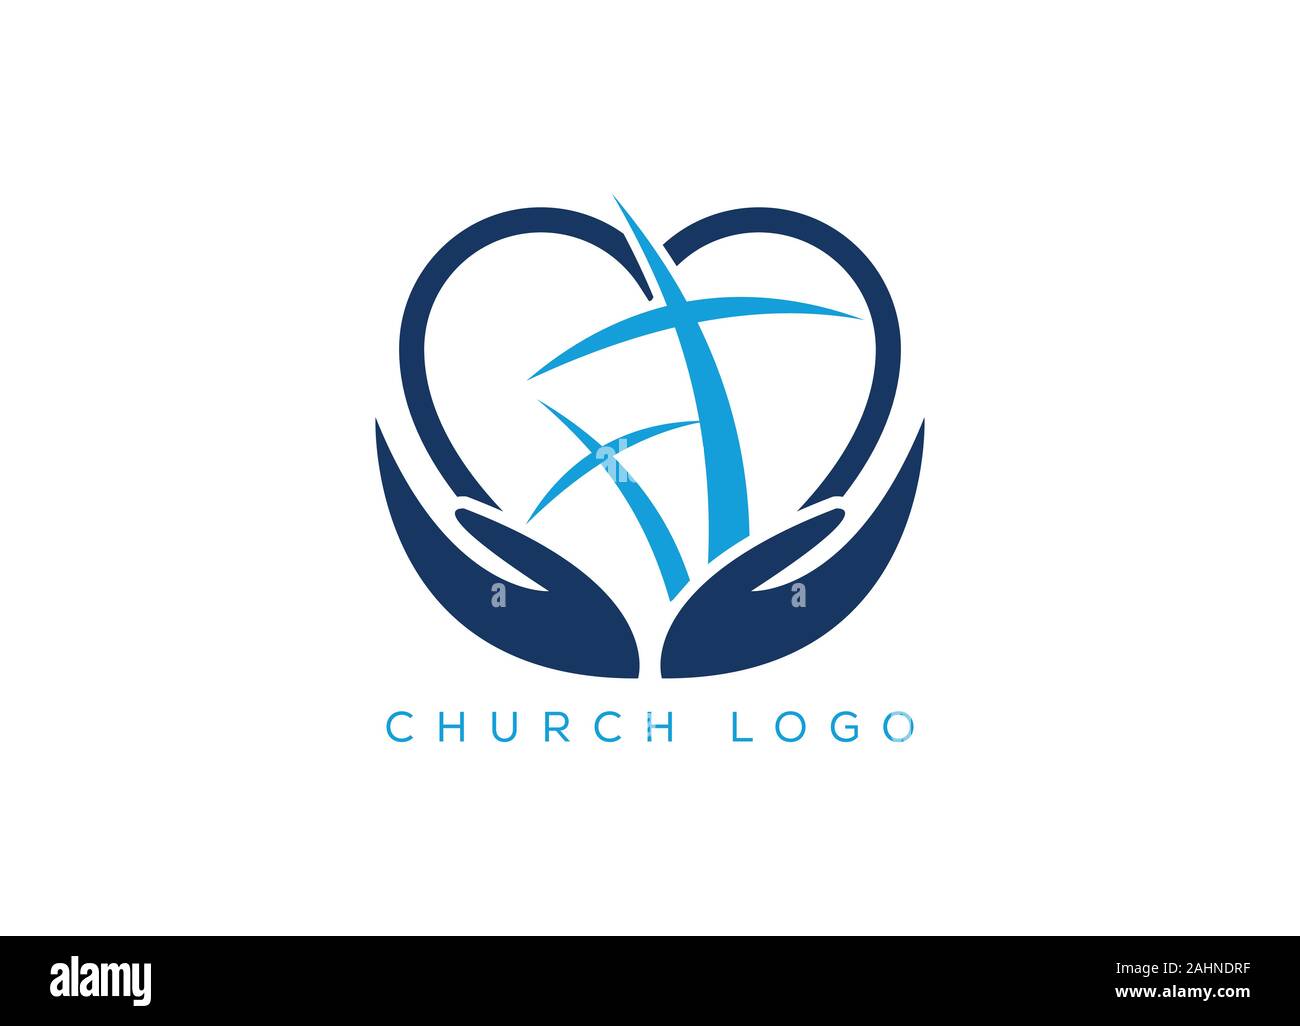 Church logo design Template for churches and Christian organizations Stock Vector